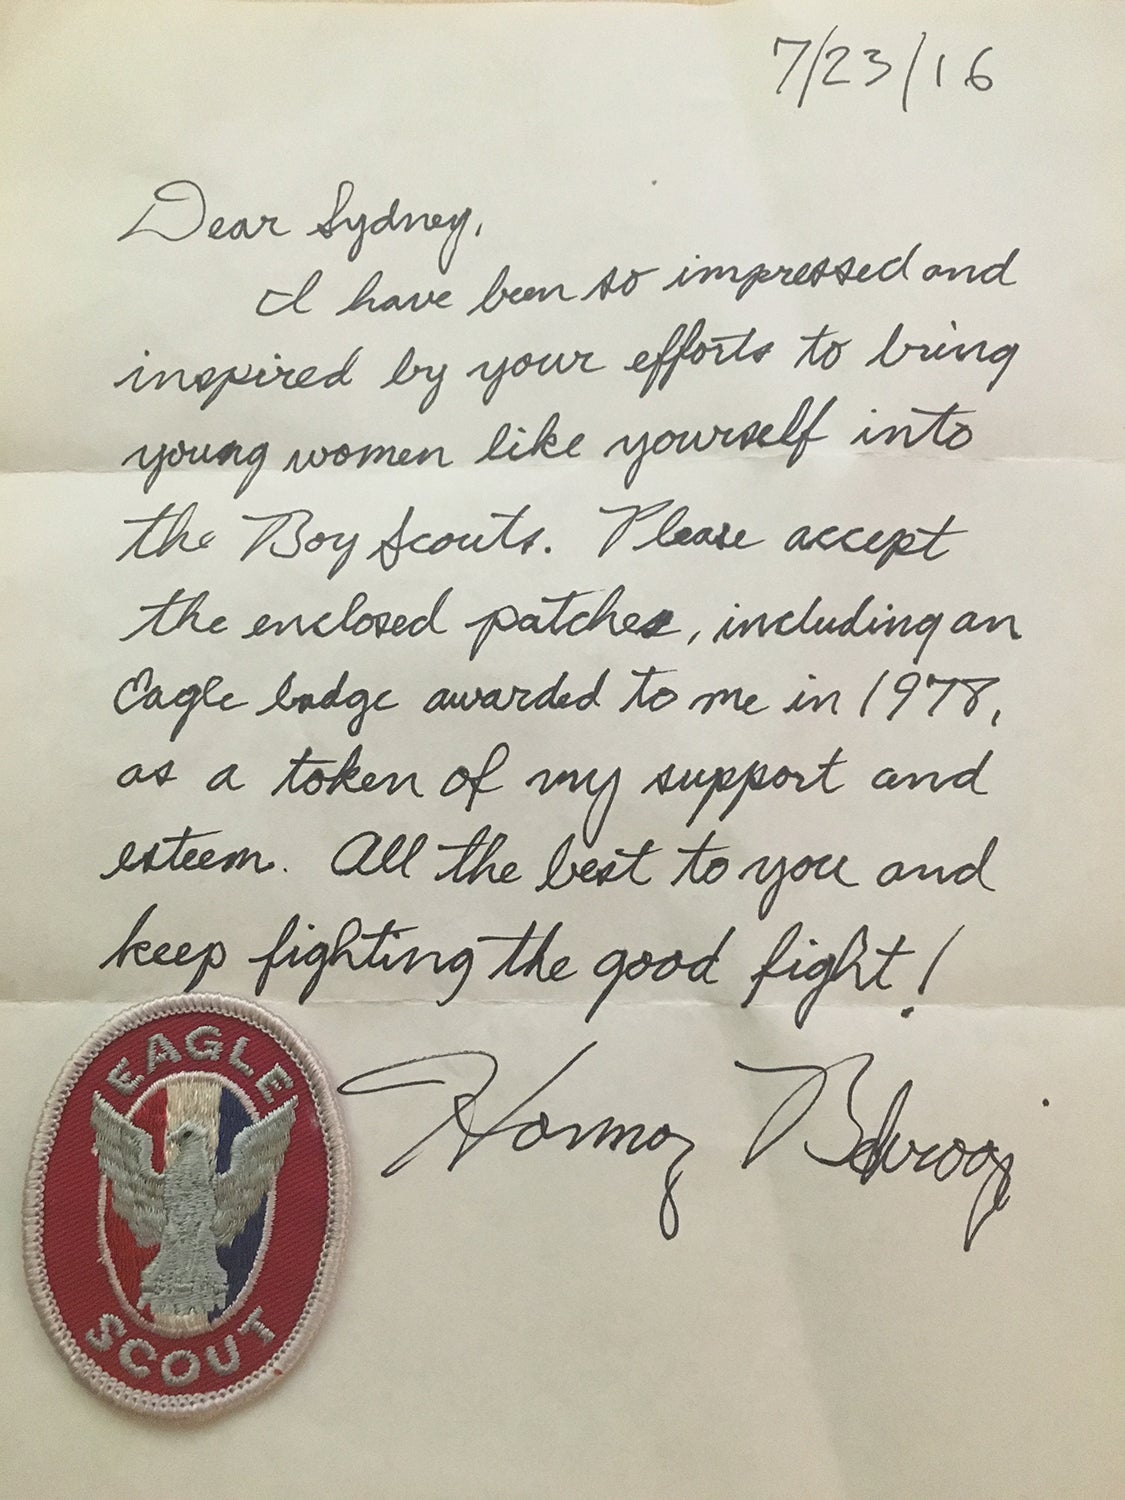 Sydney's quest inspired an Eagle Scout to send her his original badge.